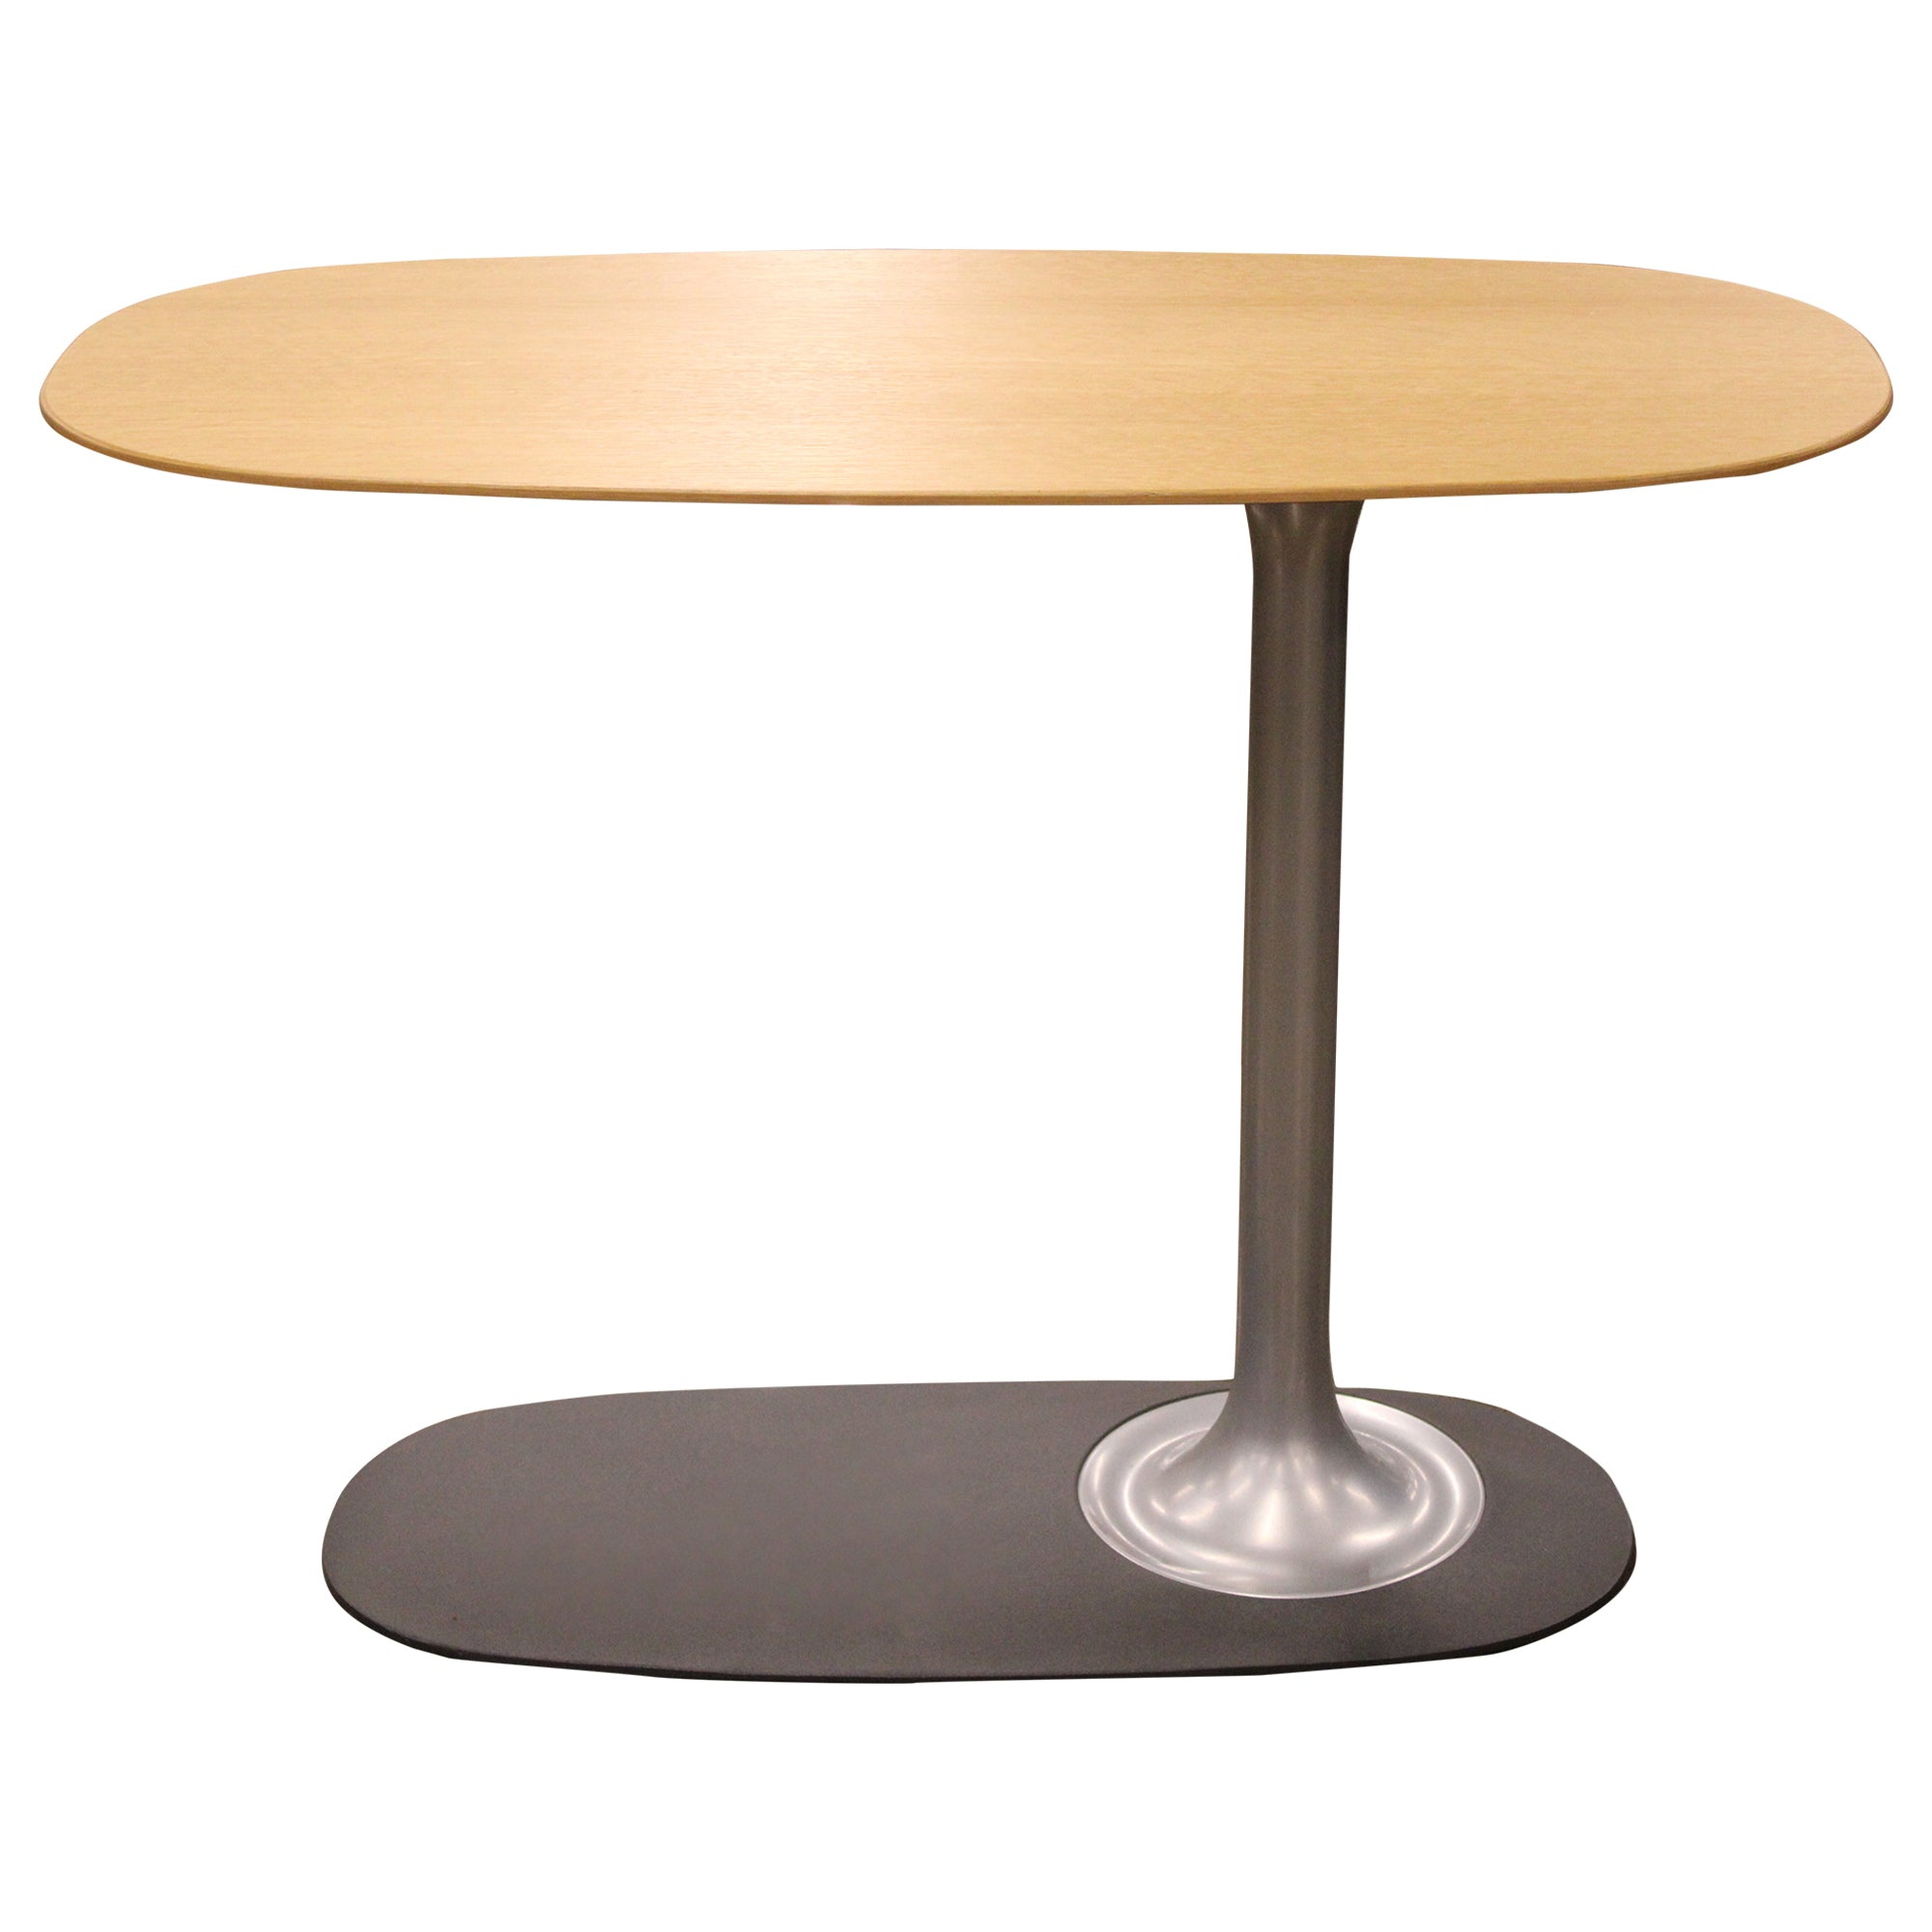 Coalesse Denizen Tablet Table, Brown - Preowned